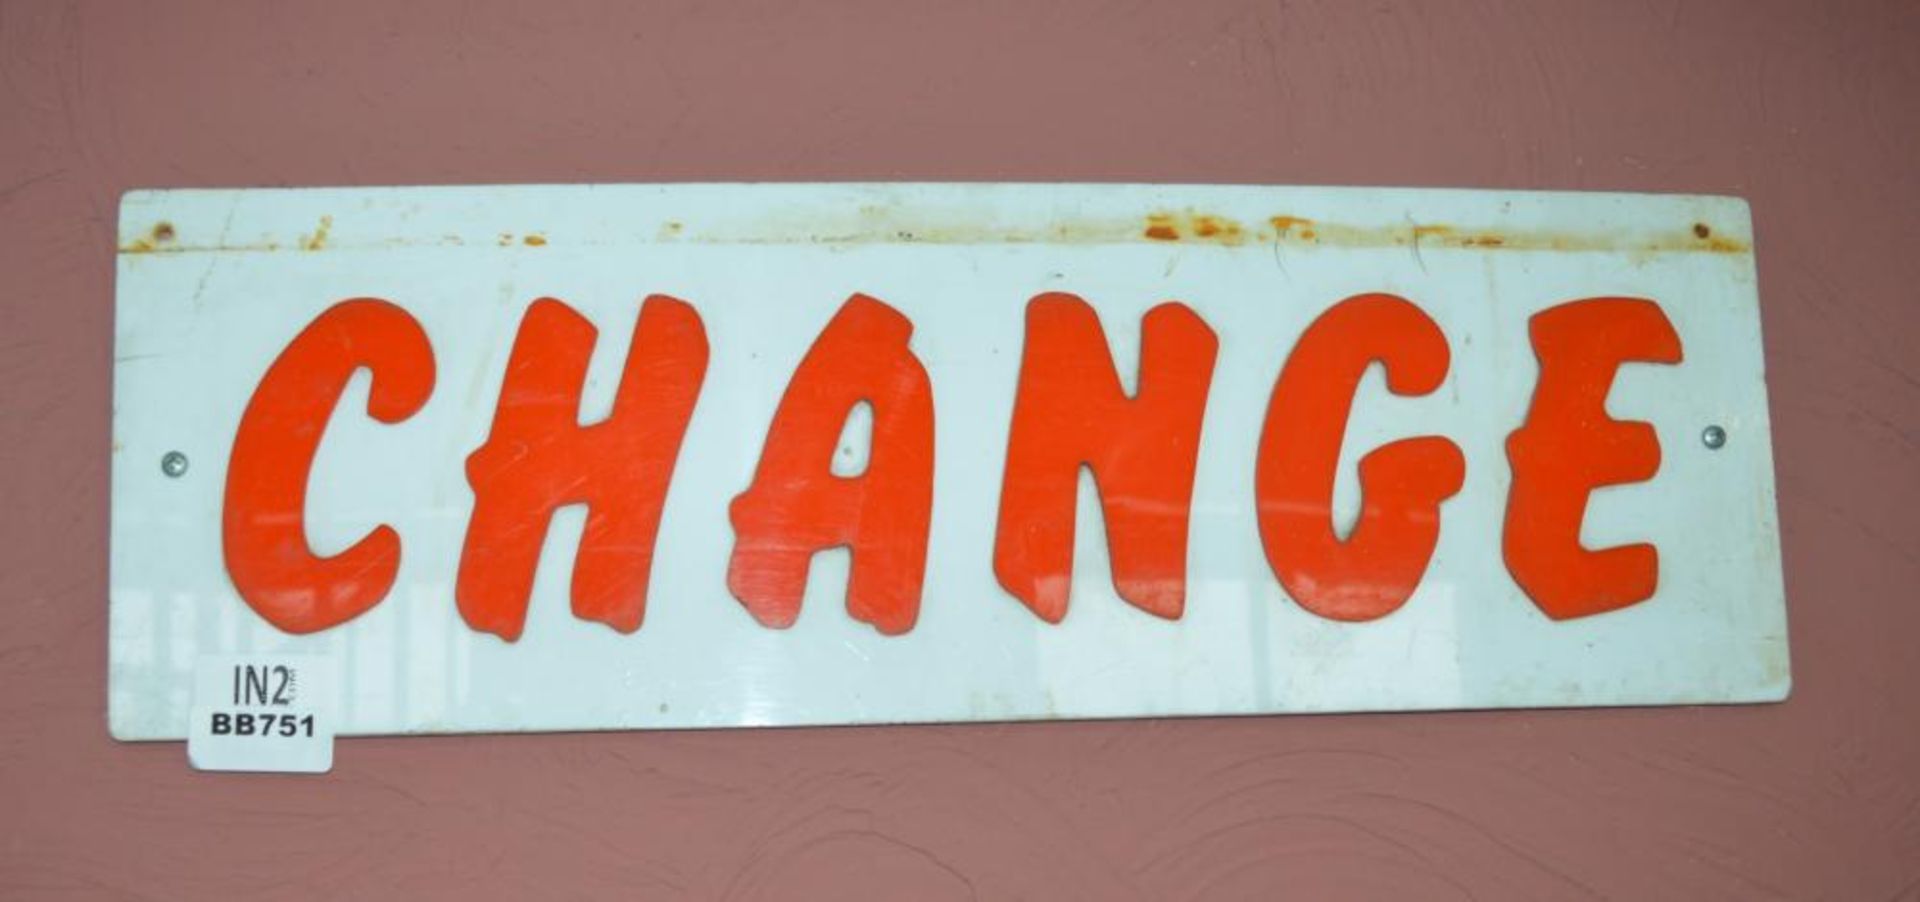 1 x Vintage Acrylic Arcade "Change" Notice Sign - 8 x 24 Inches - Ref BB751 - CL351 - Location: Chor - Image 3 of 3